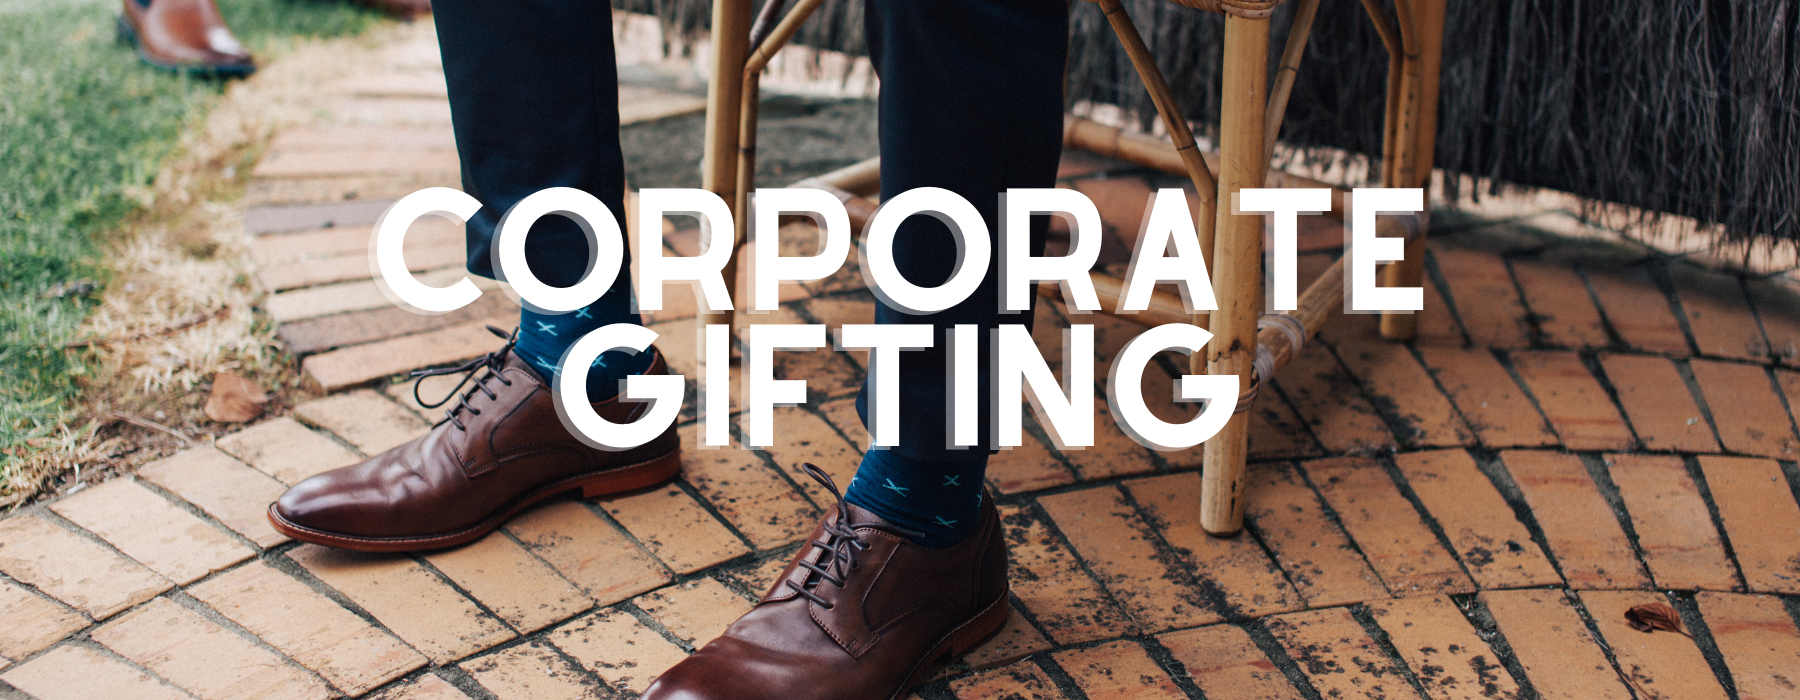 corporate_gifting_nz